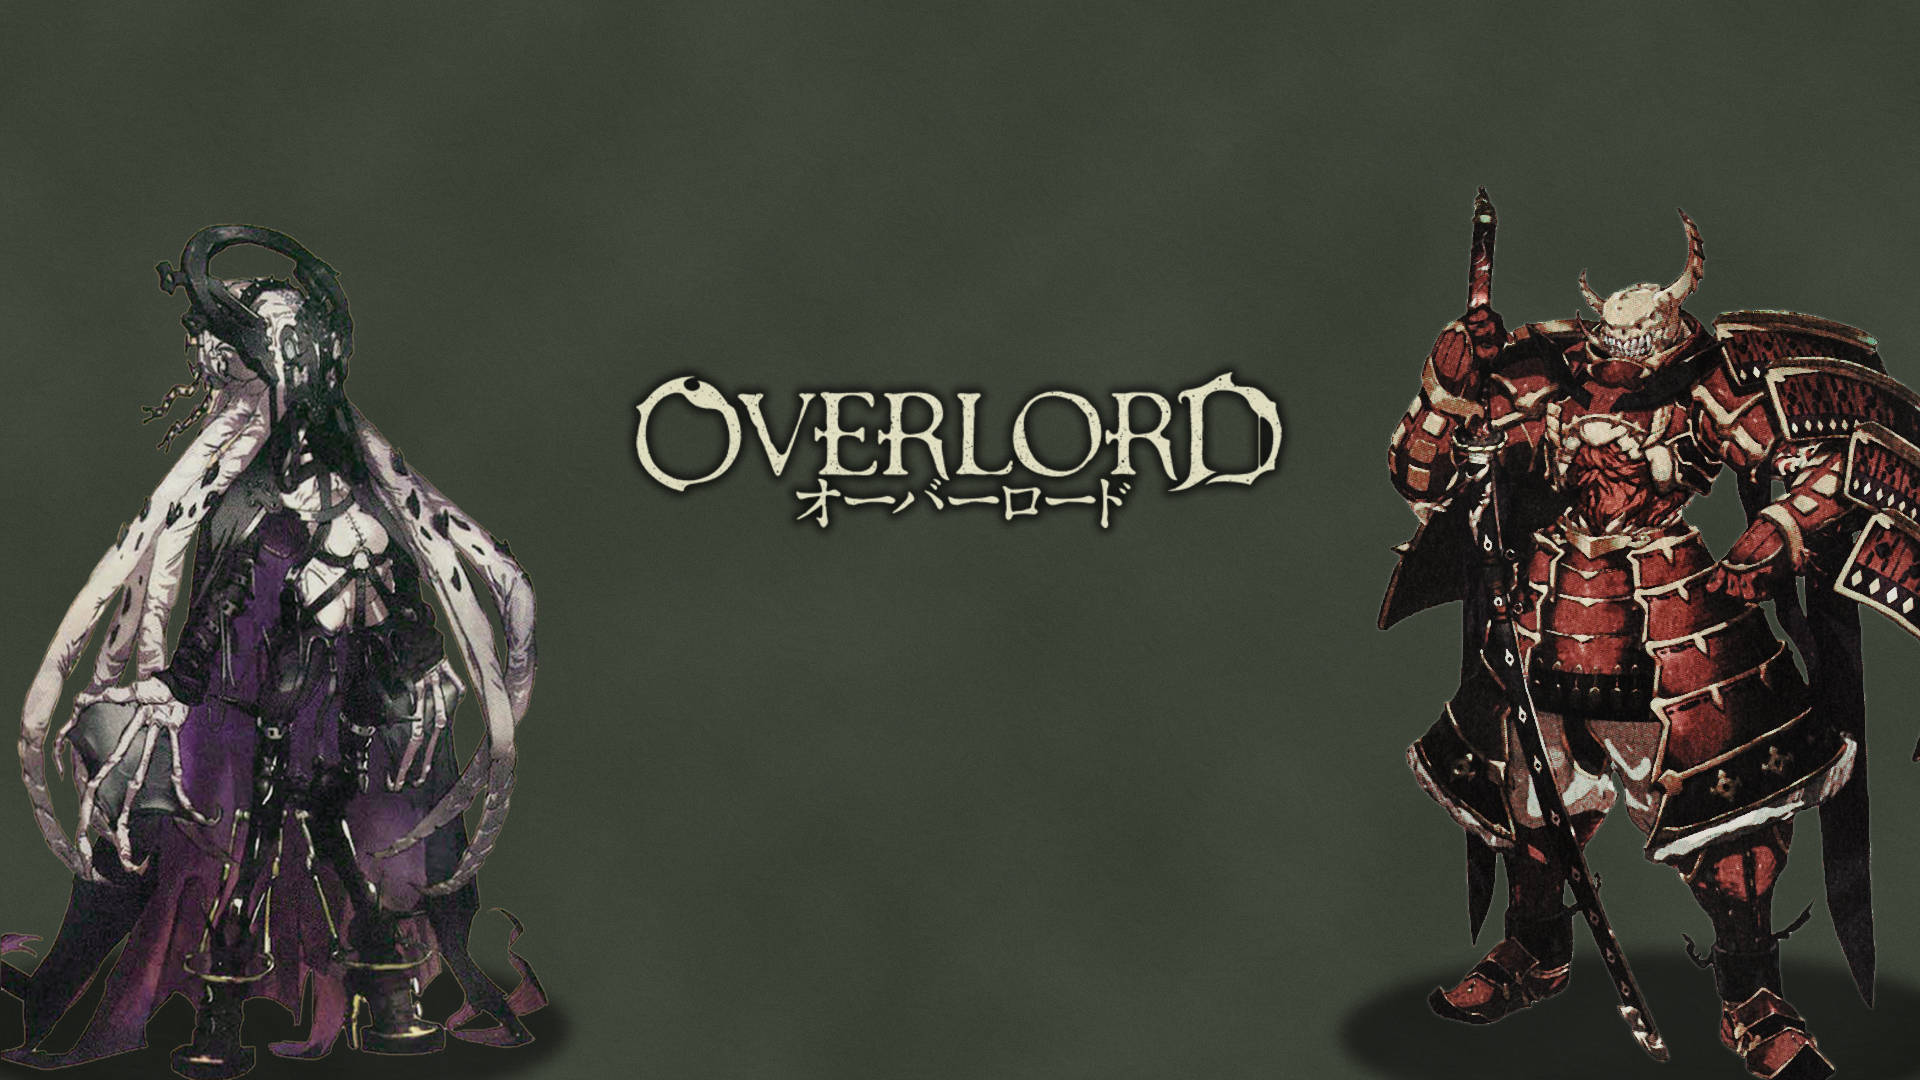 Hd Overlord Anime Poster Background